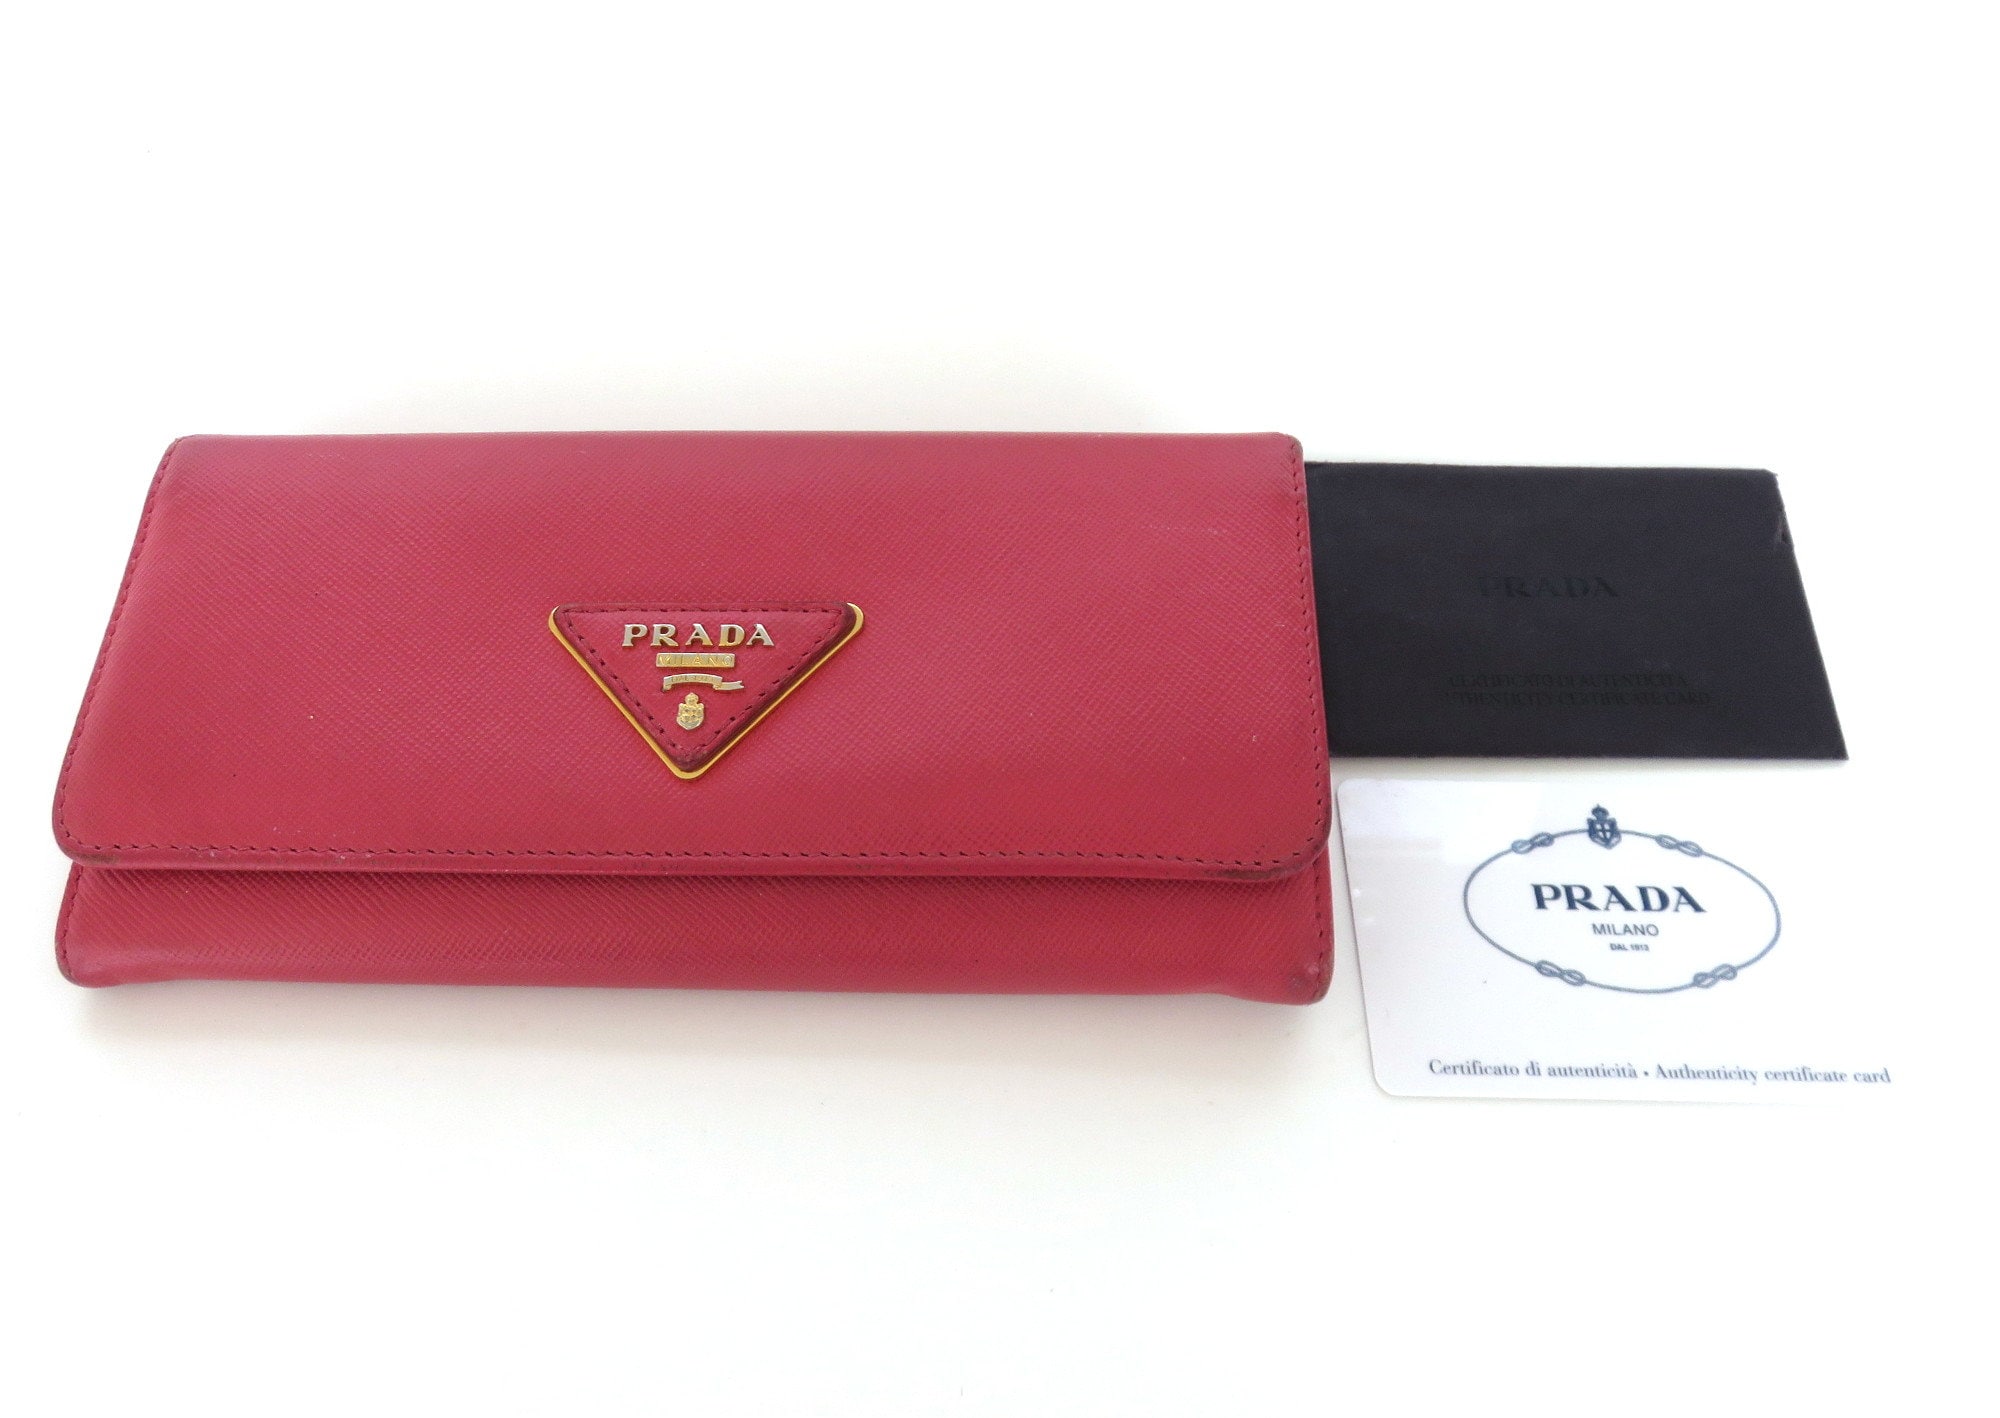 PRADA Hot Pink Saffiano Leather Wallet - Etsy